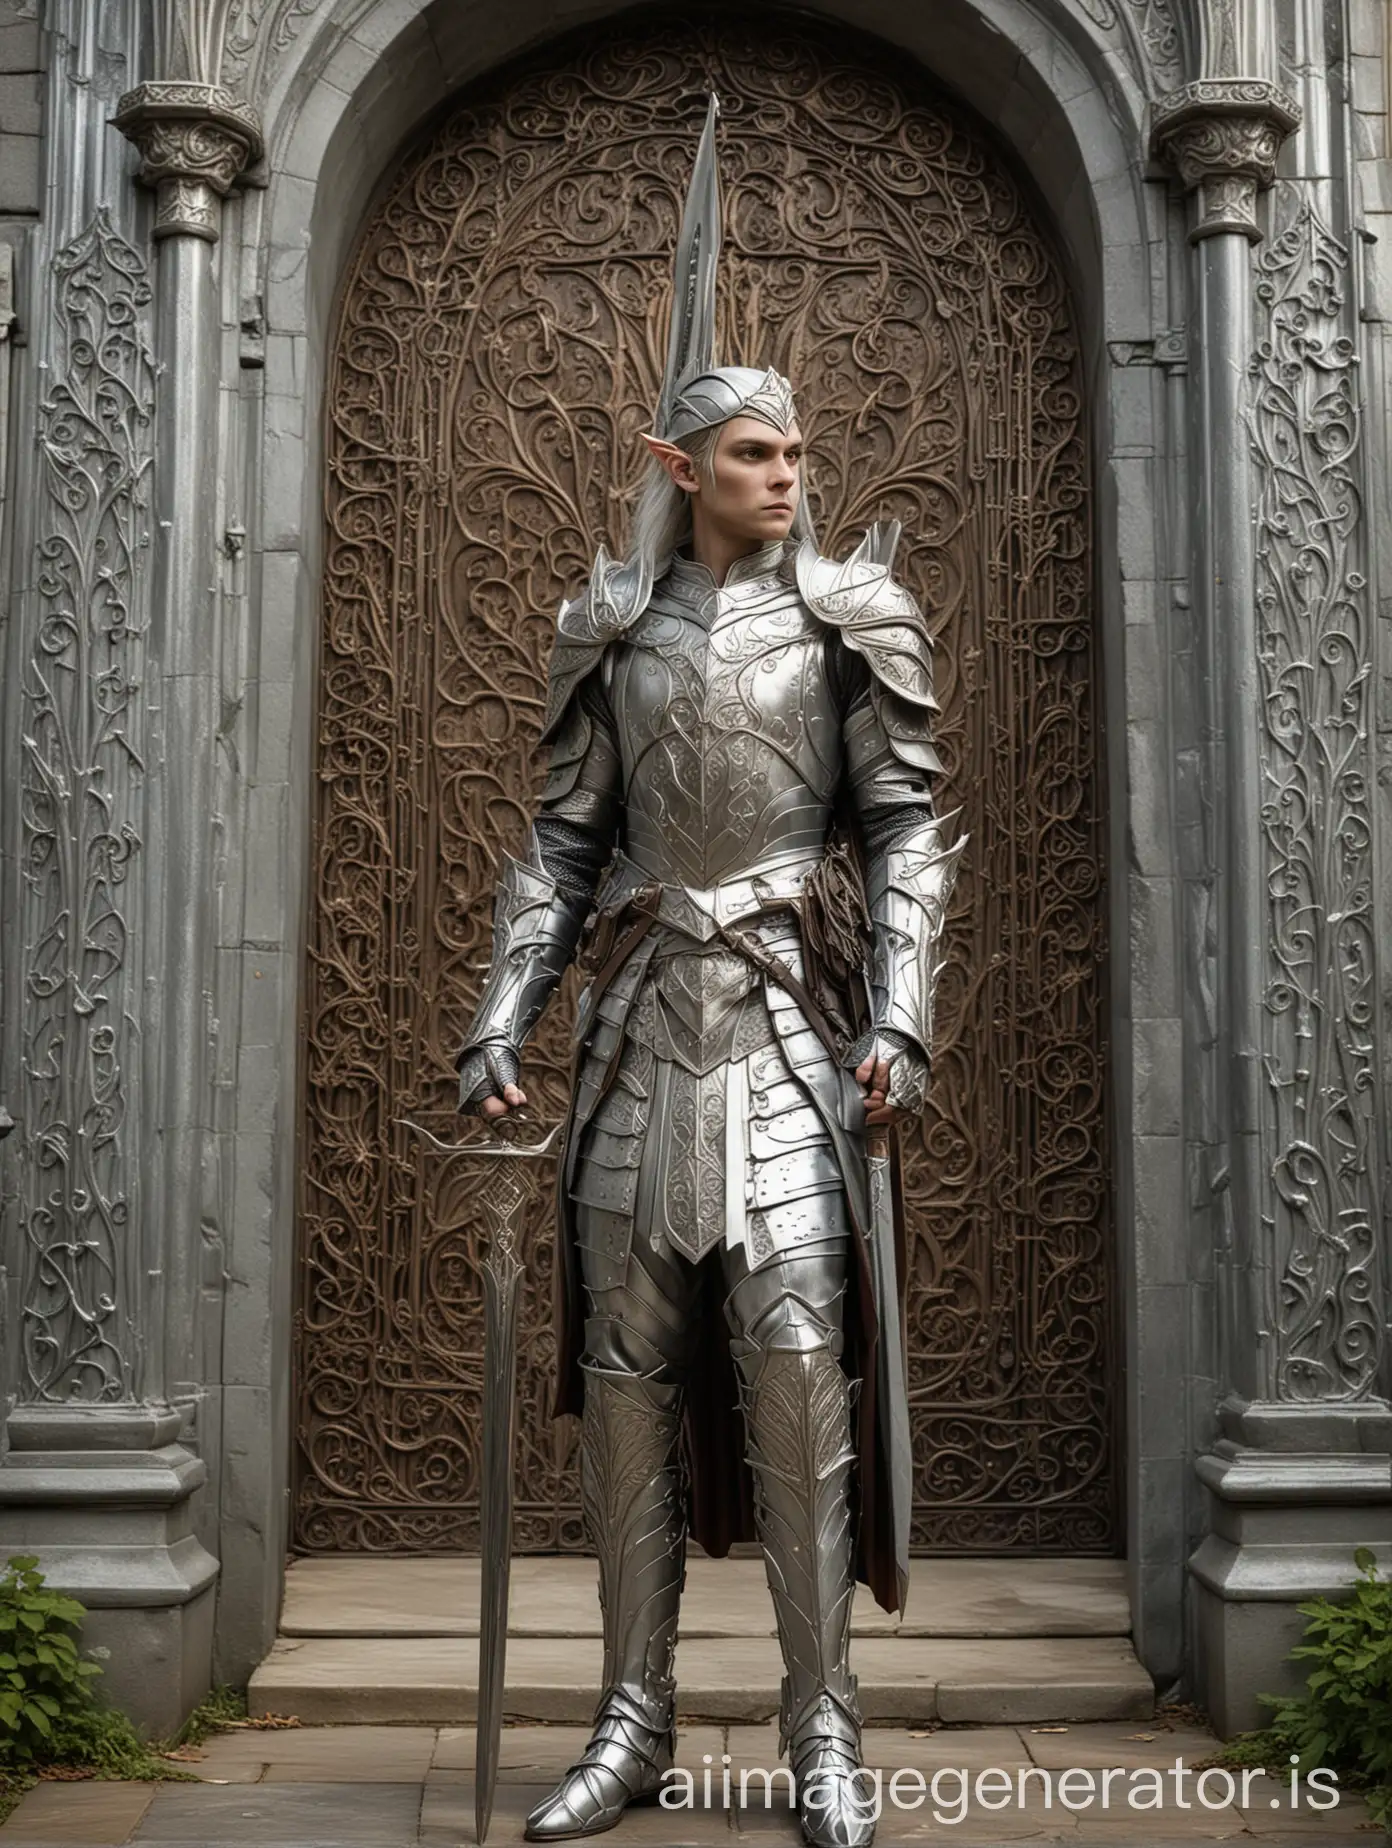 A member of the elven royal guard, clad in gleaming silver armor and carrying a long spear, standing watch at the gates of an elven palace